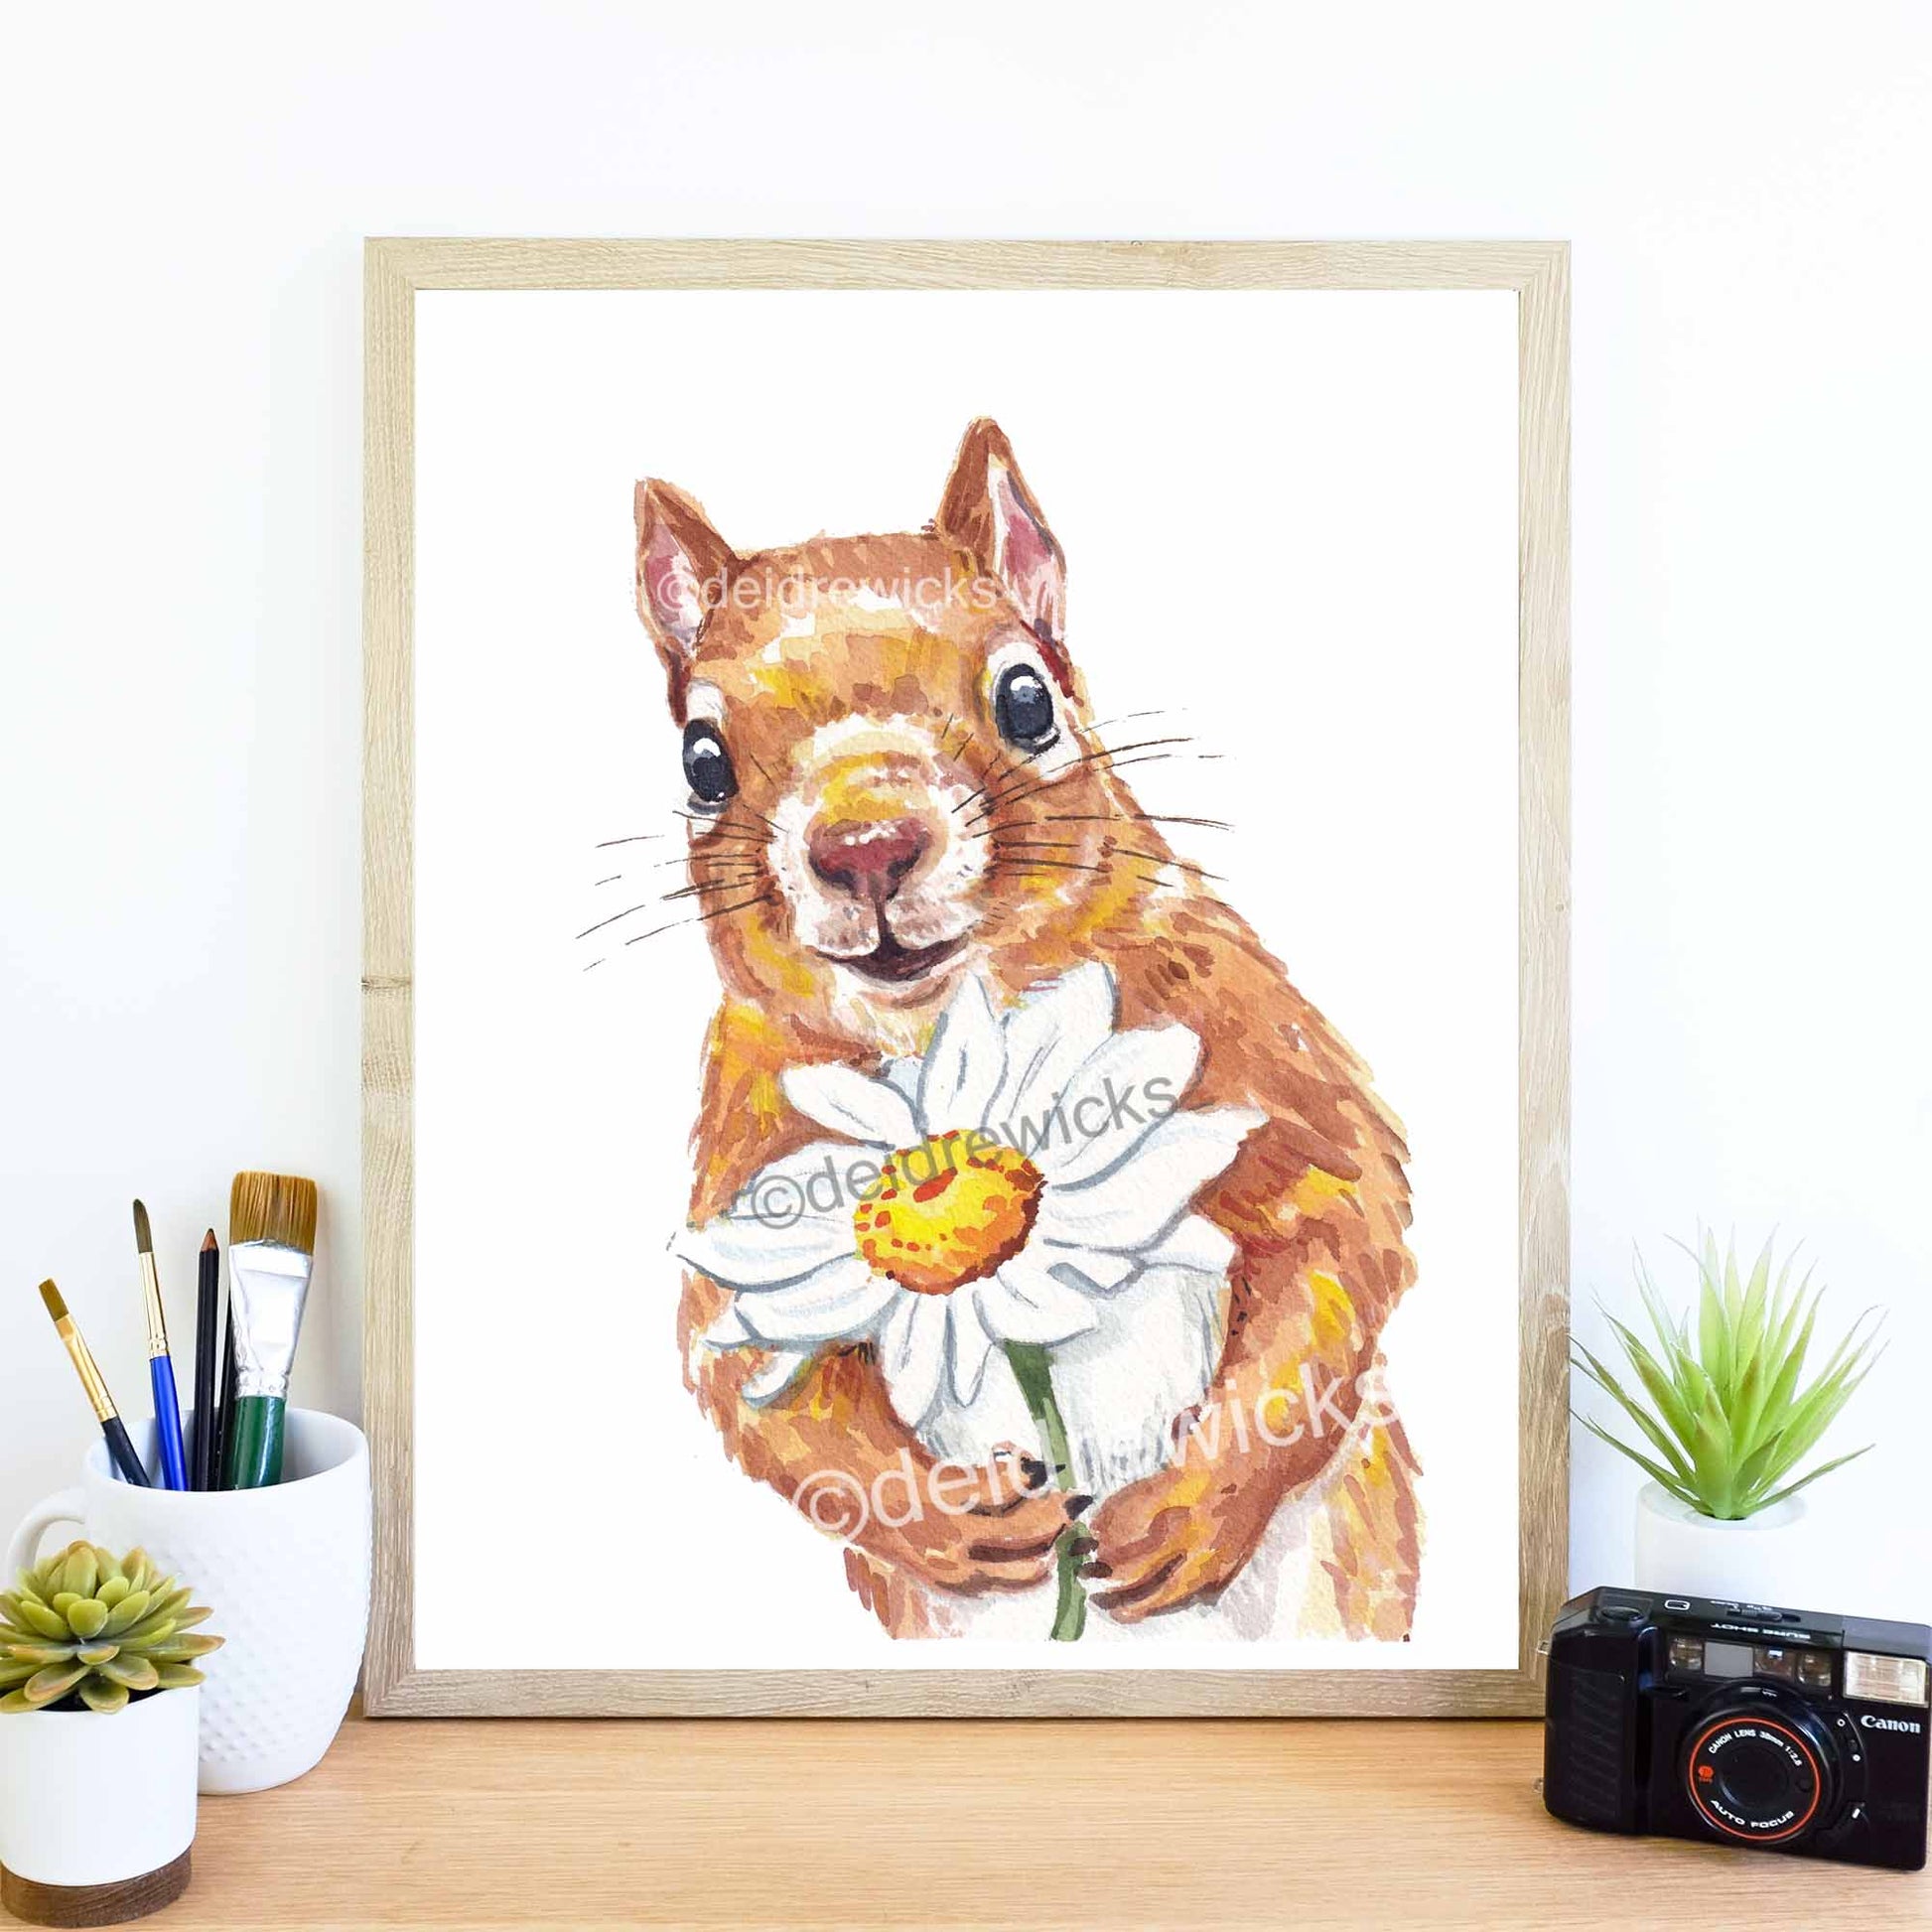 Framed example of a squirrel watercolor painting by Deidre Wicks